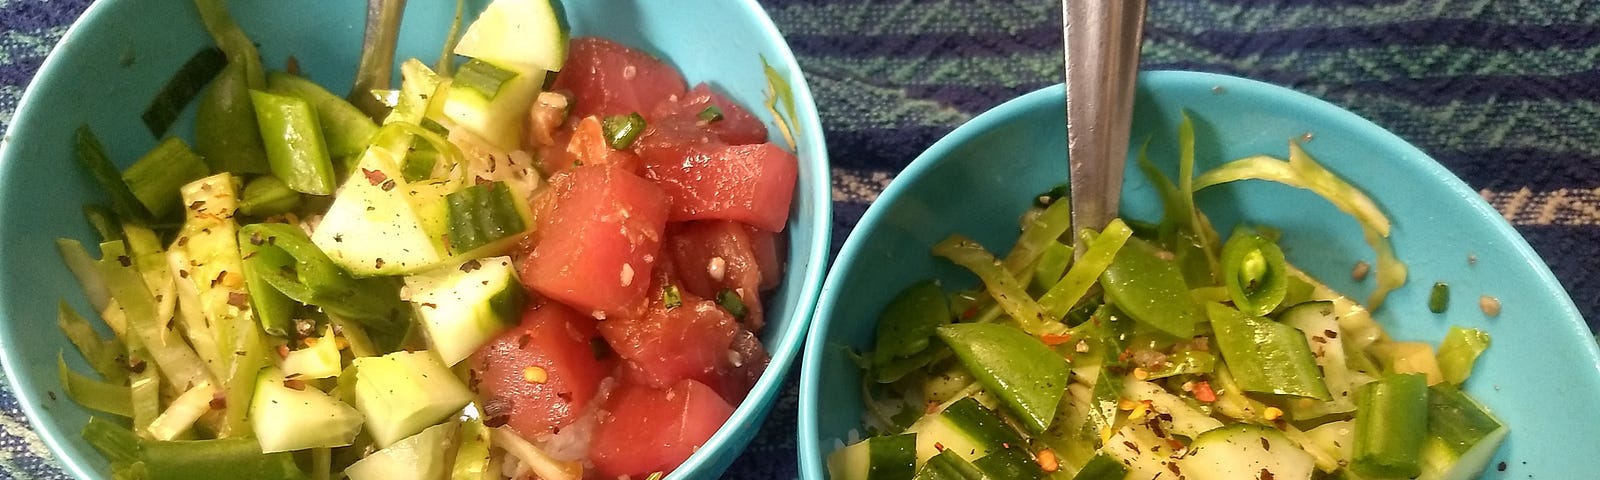 Two bowls of poke with tuna, rice, and mixed raw vegetables.